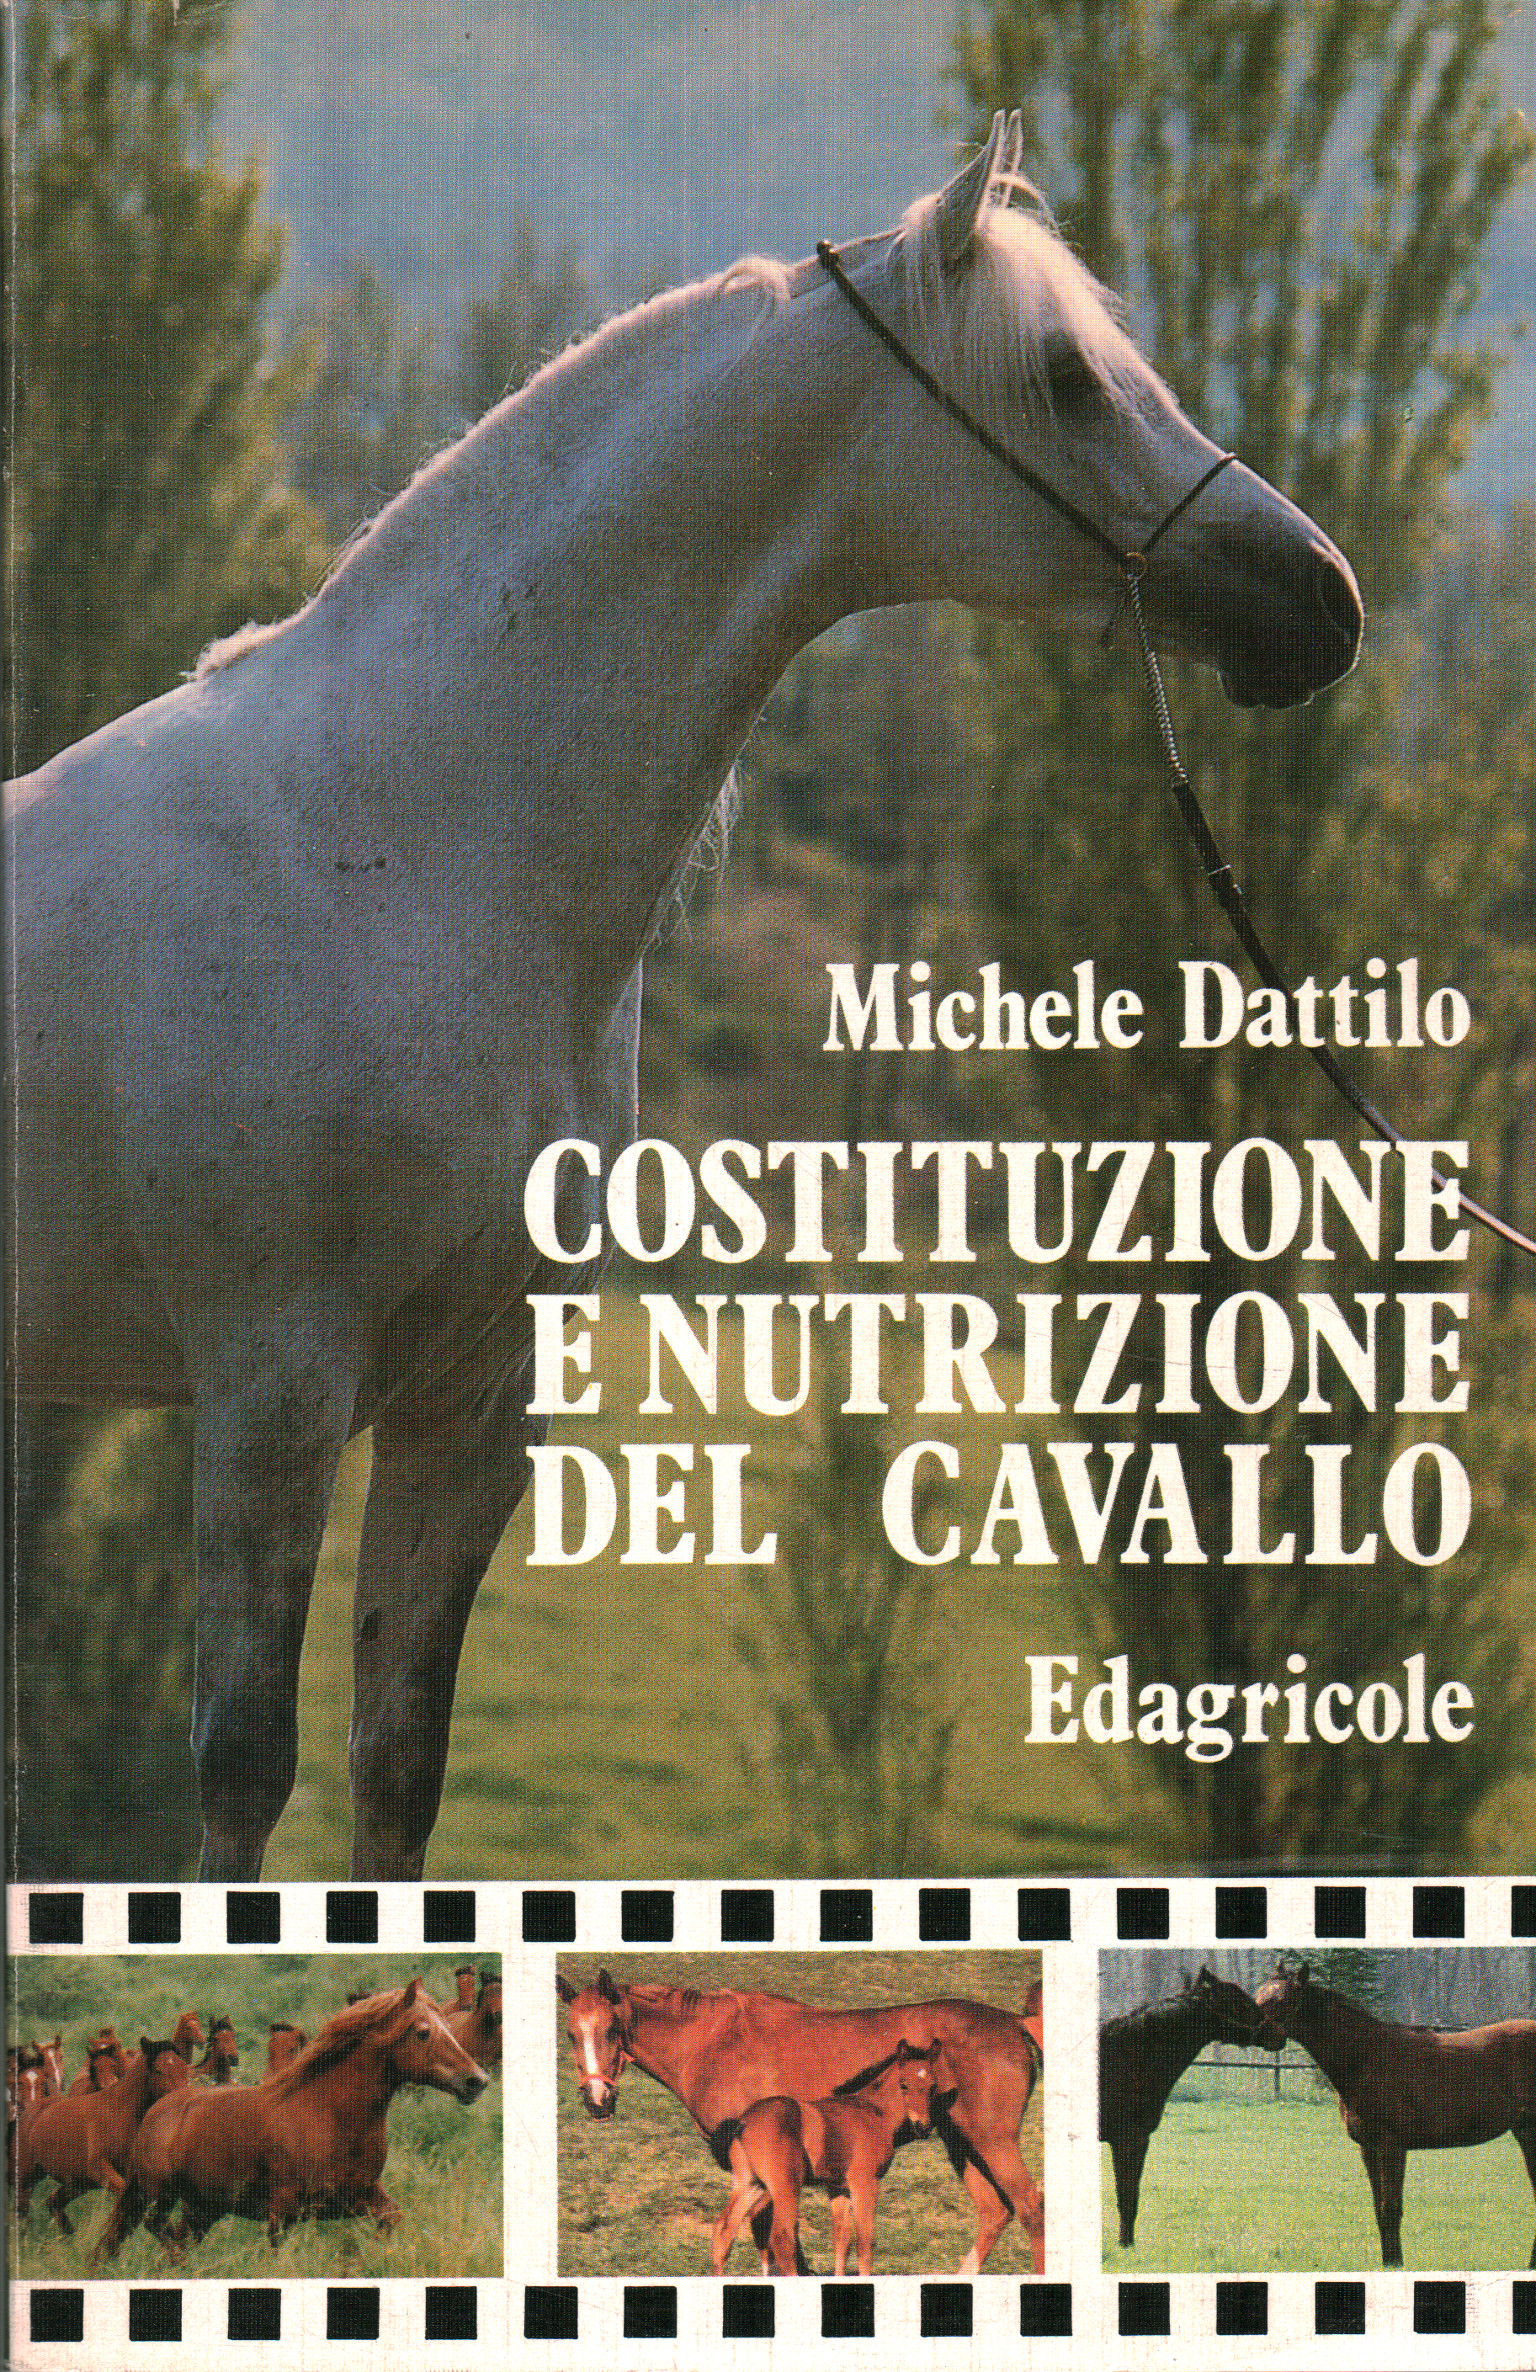 Horse constitution and nutrition, Michele Dattilo